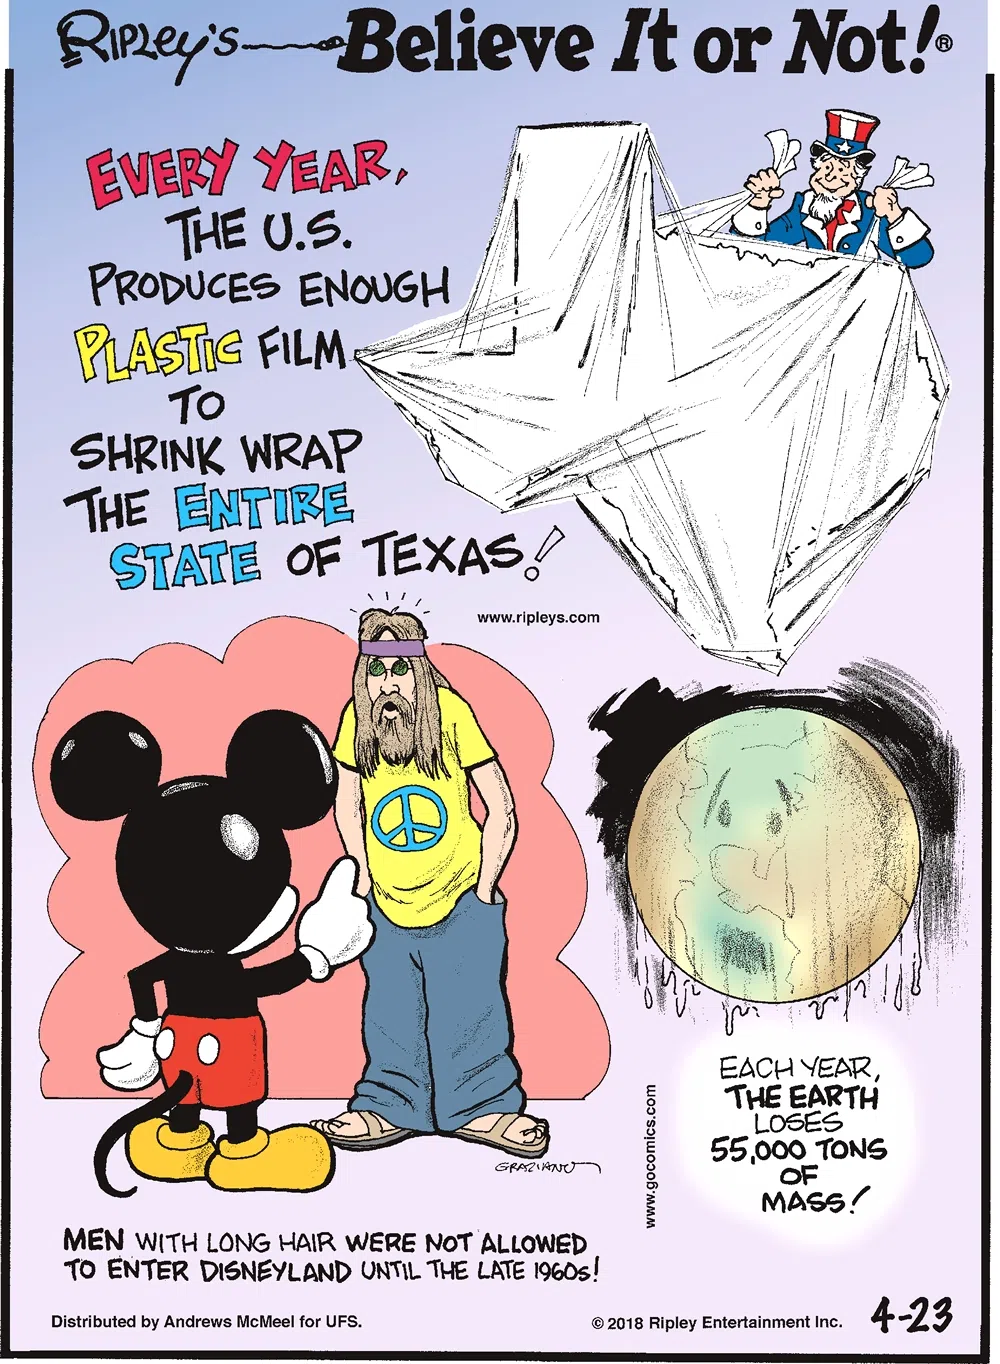 Every year, the U.S. produces enough plastic film to shrink wrap the entire state of Texas!------------------- Men with long hair were not allowed to enter Disneyland until the late 1960s!-------------------- Each year, the Earth loses 55,000 tons of mass!